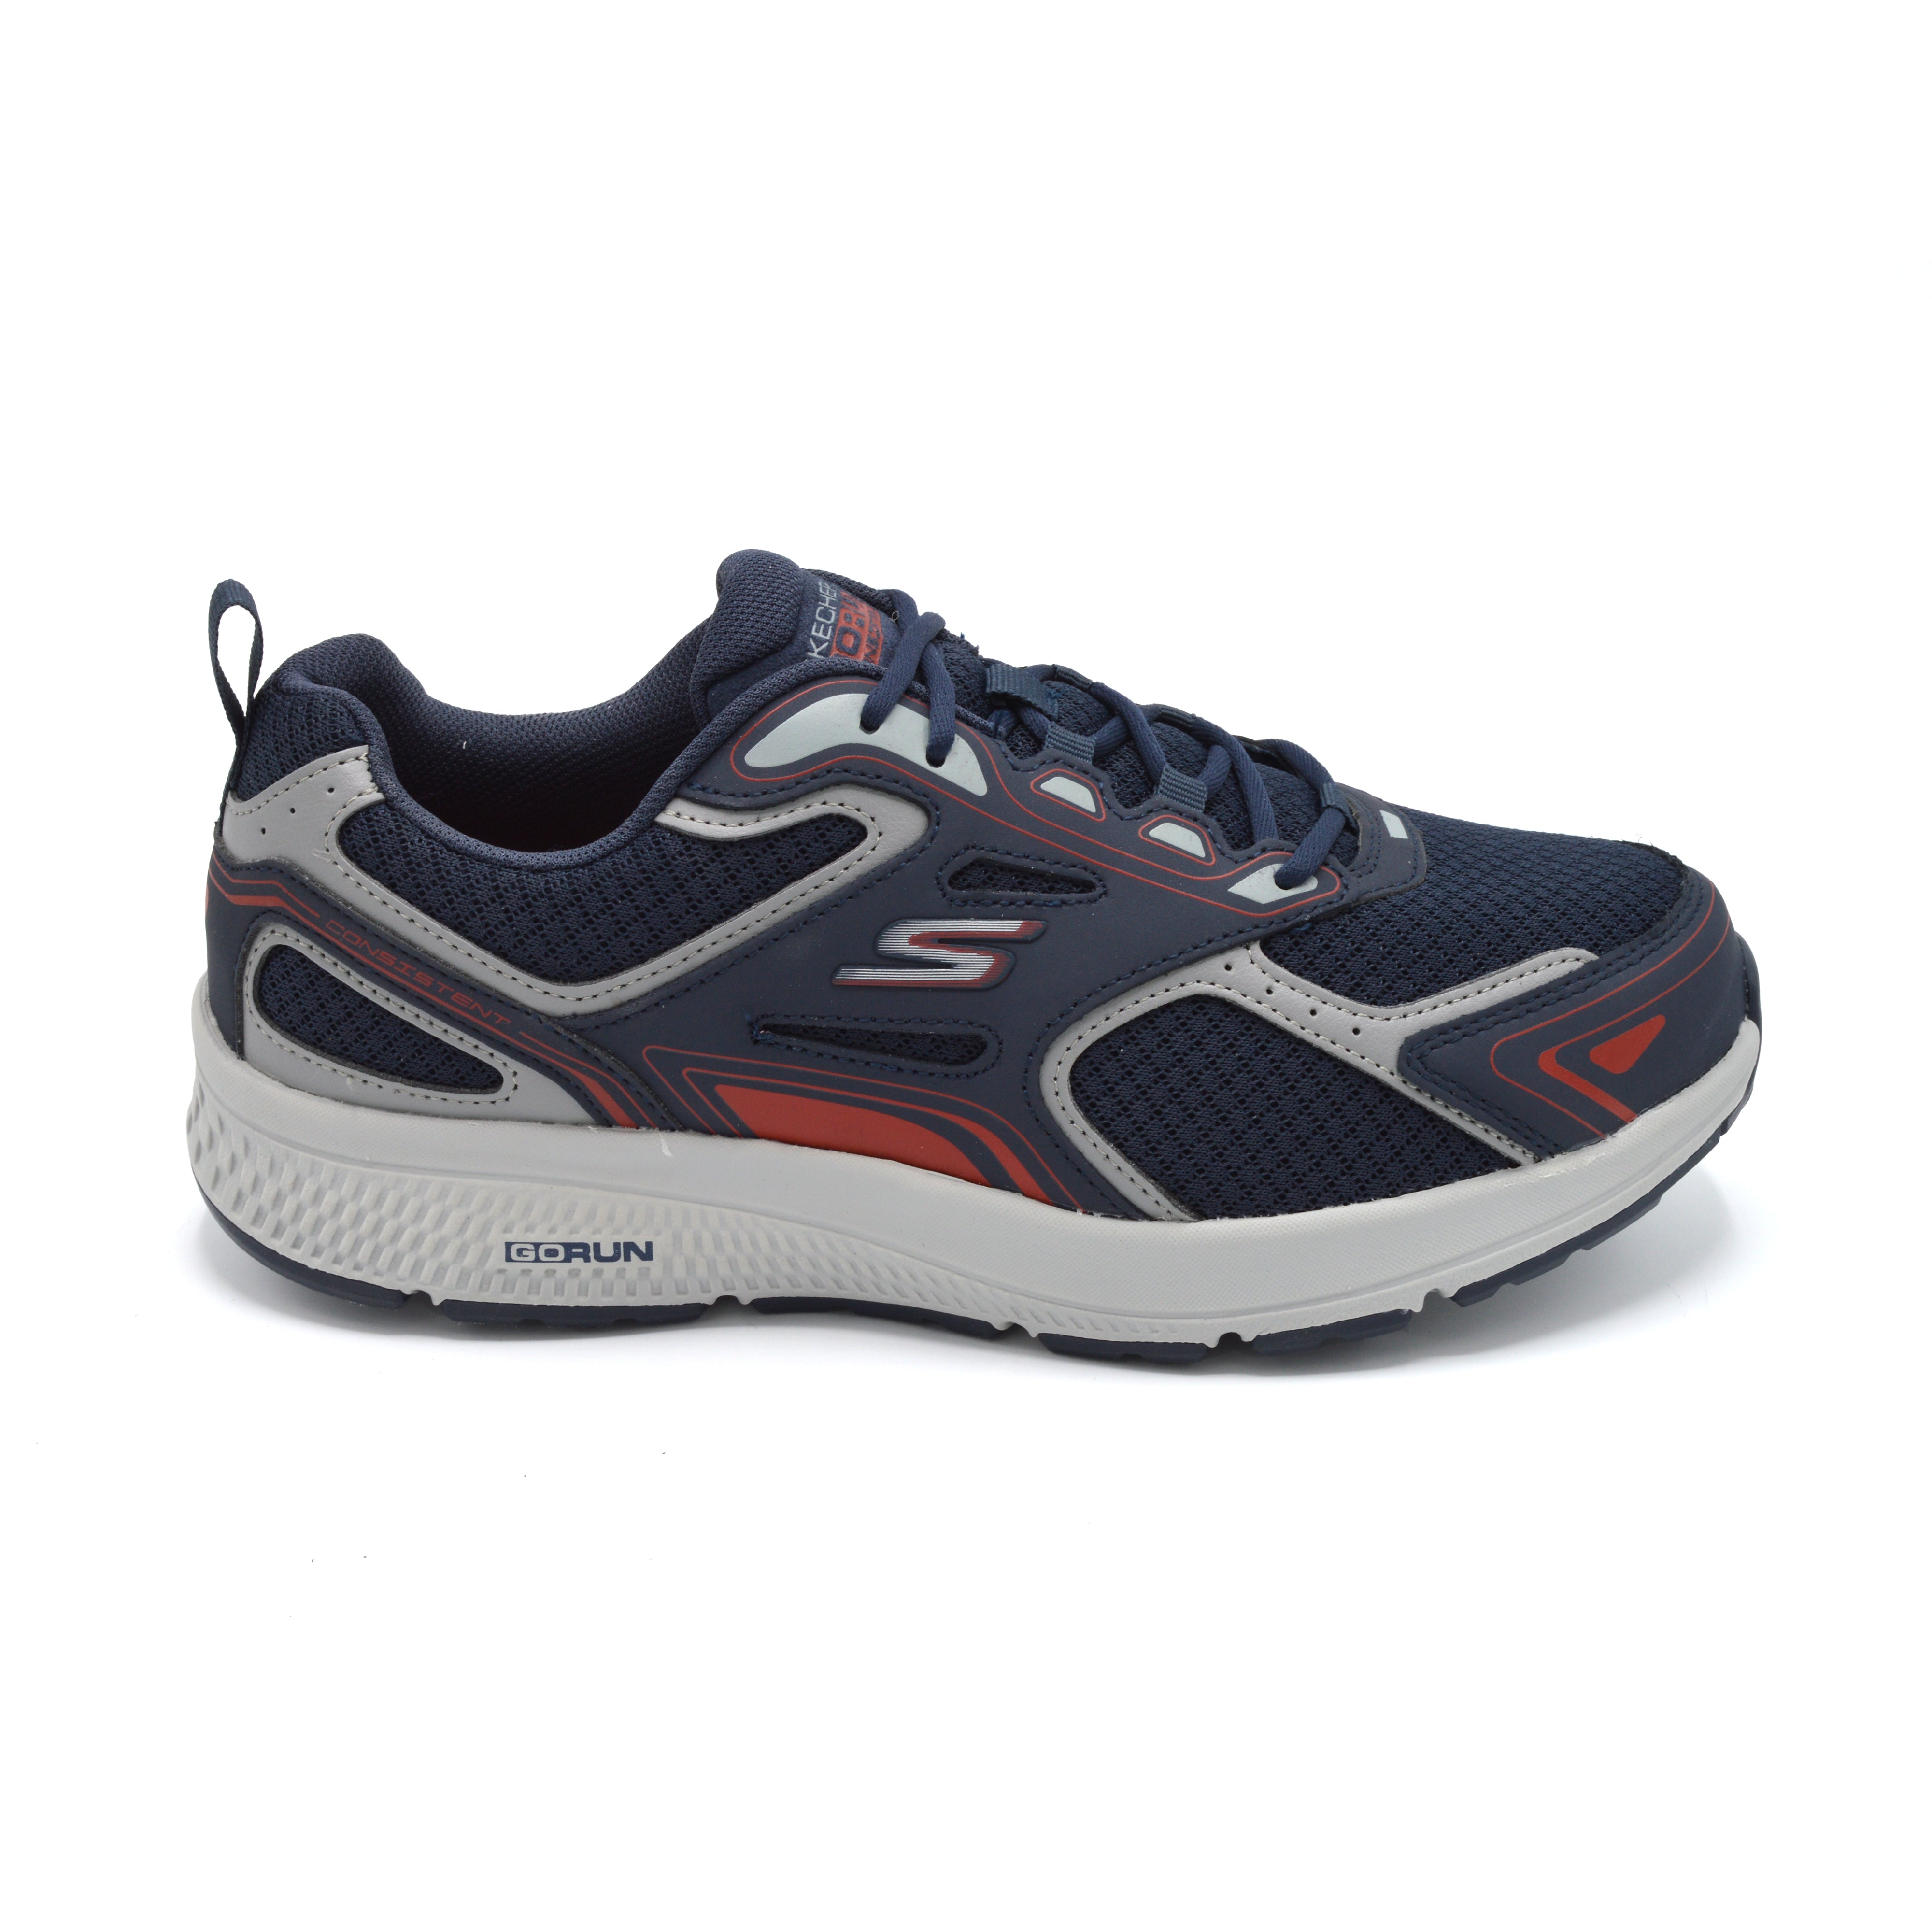 Skechers Go Run Consistent - Mens Wide Fit Trainer - 4E Fitting - Navy/Red